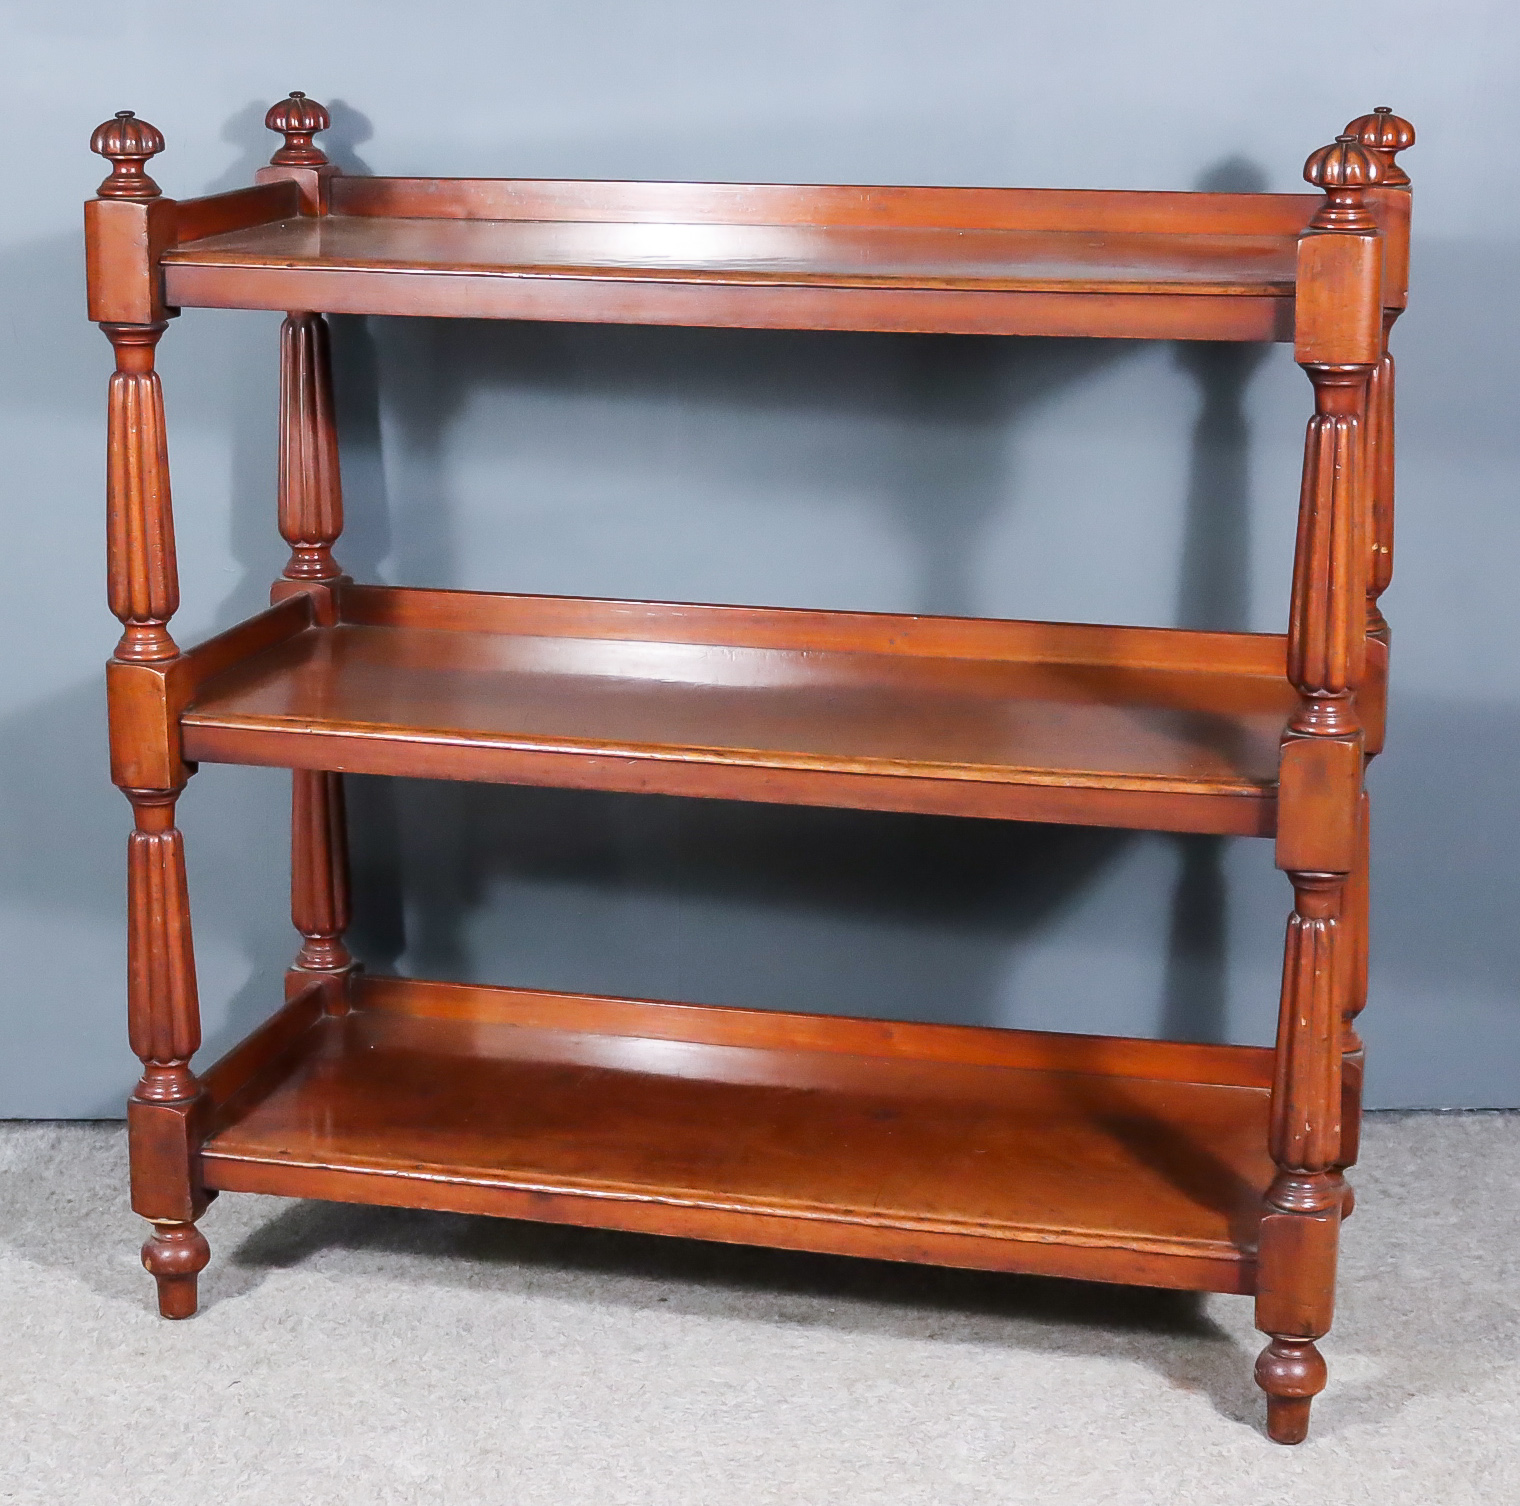 A Victorian Mahogany Three-Tier Tray Top Dinner Wagon, with turned and reeded finials and